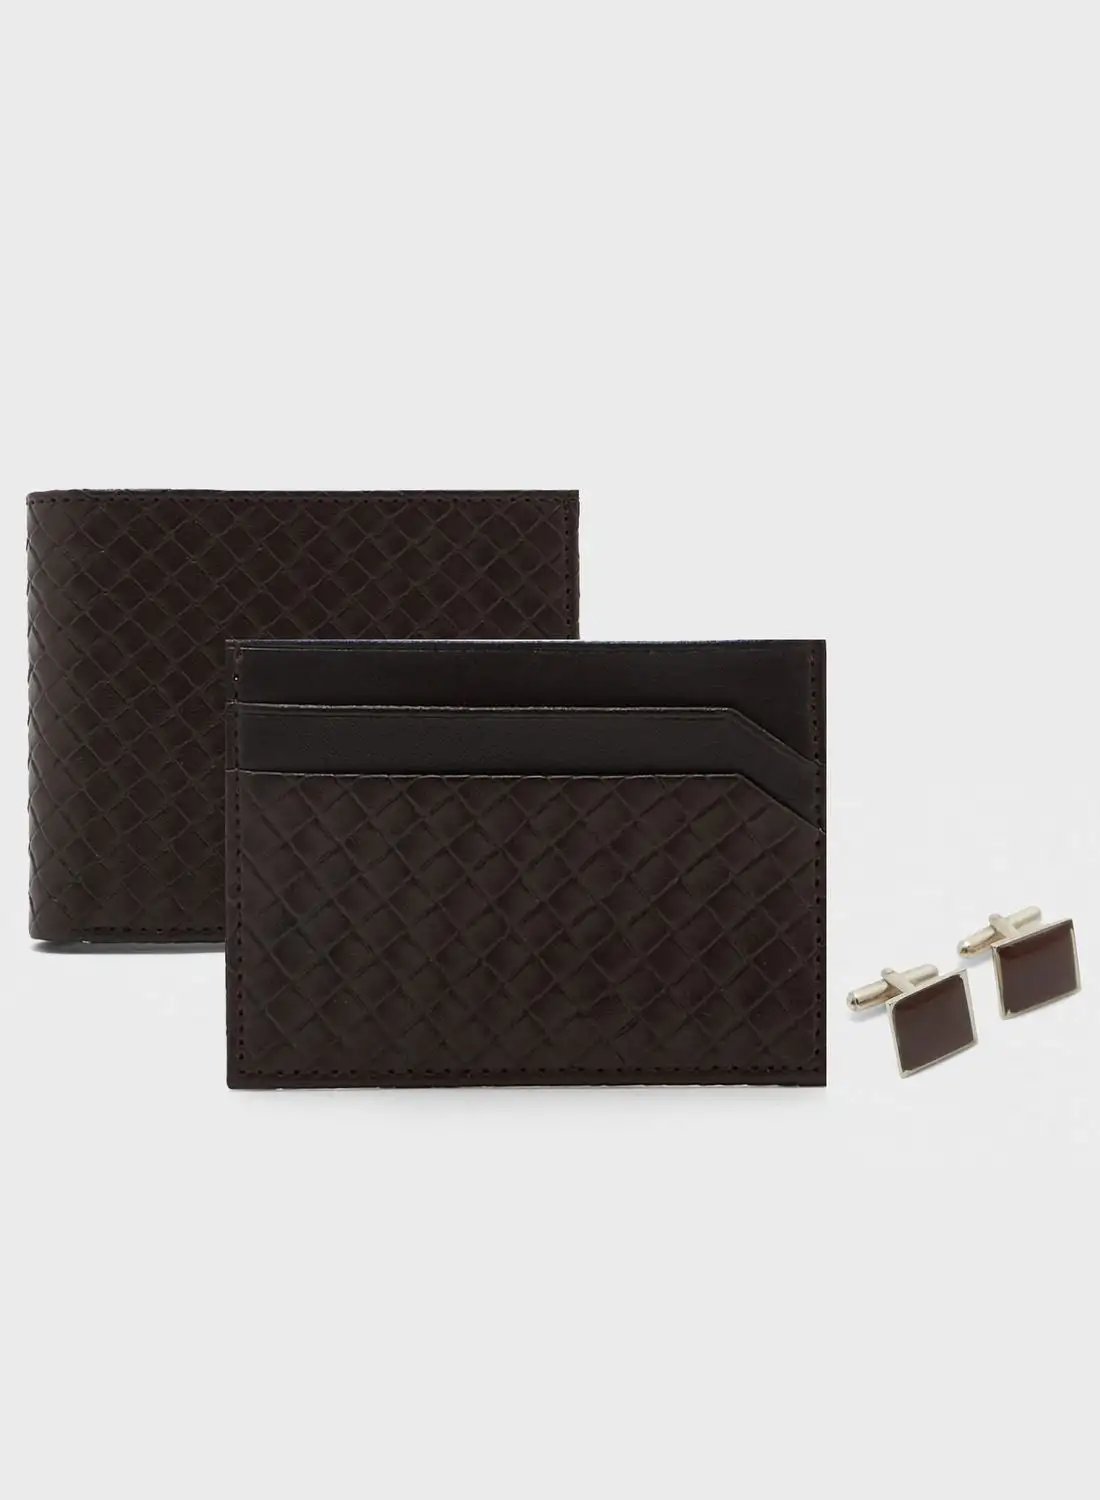 Robert Wood Leatherette Wallet, Card Holder Ad Cuff Links Gift Set